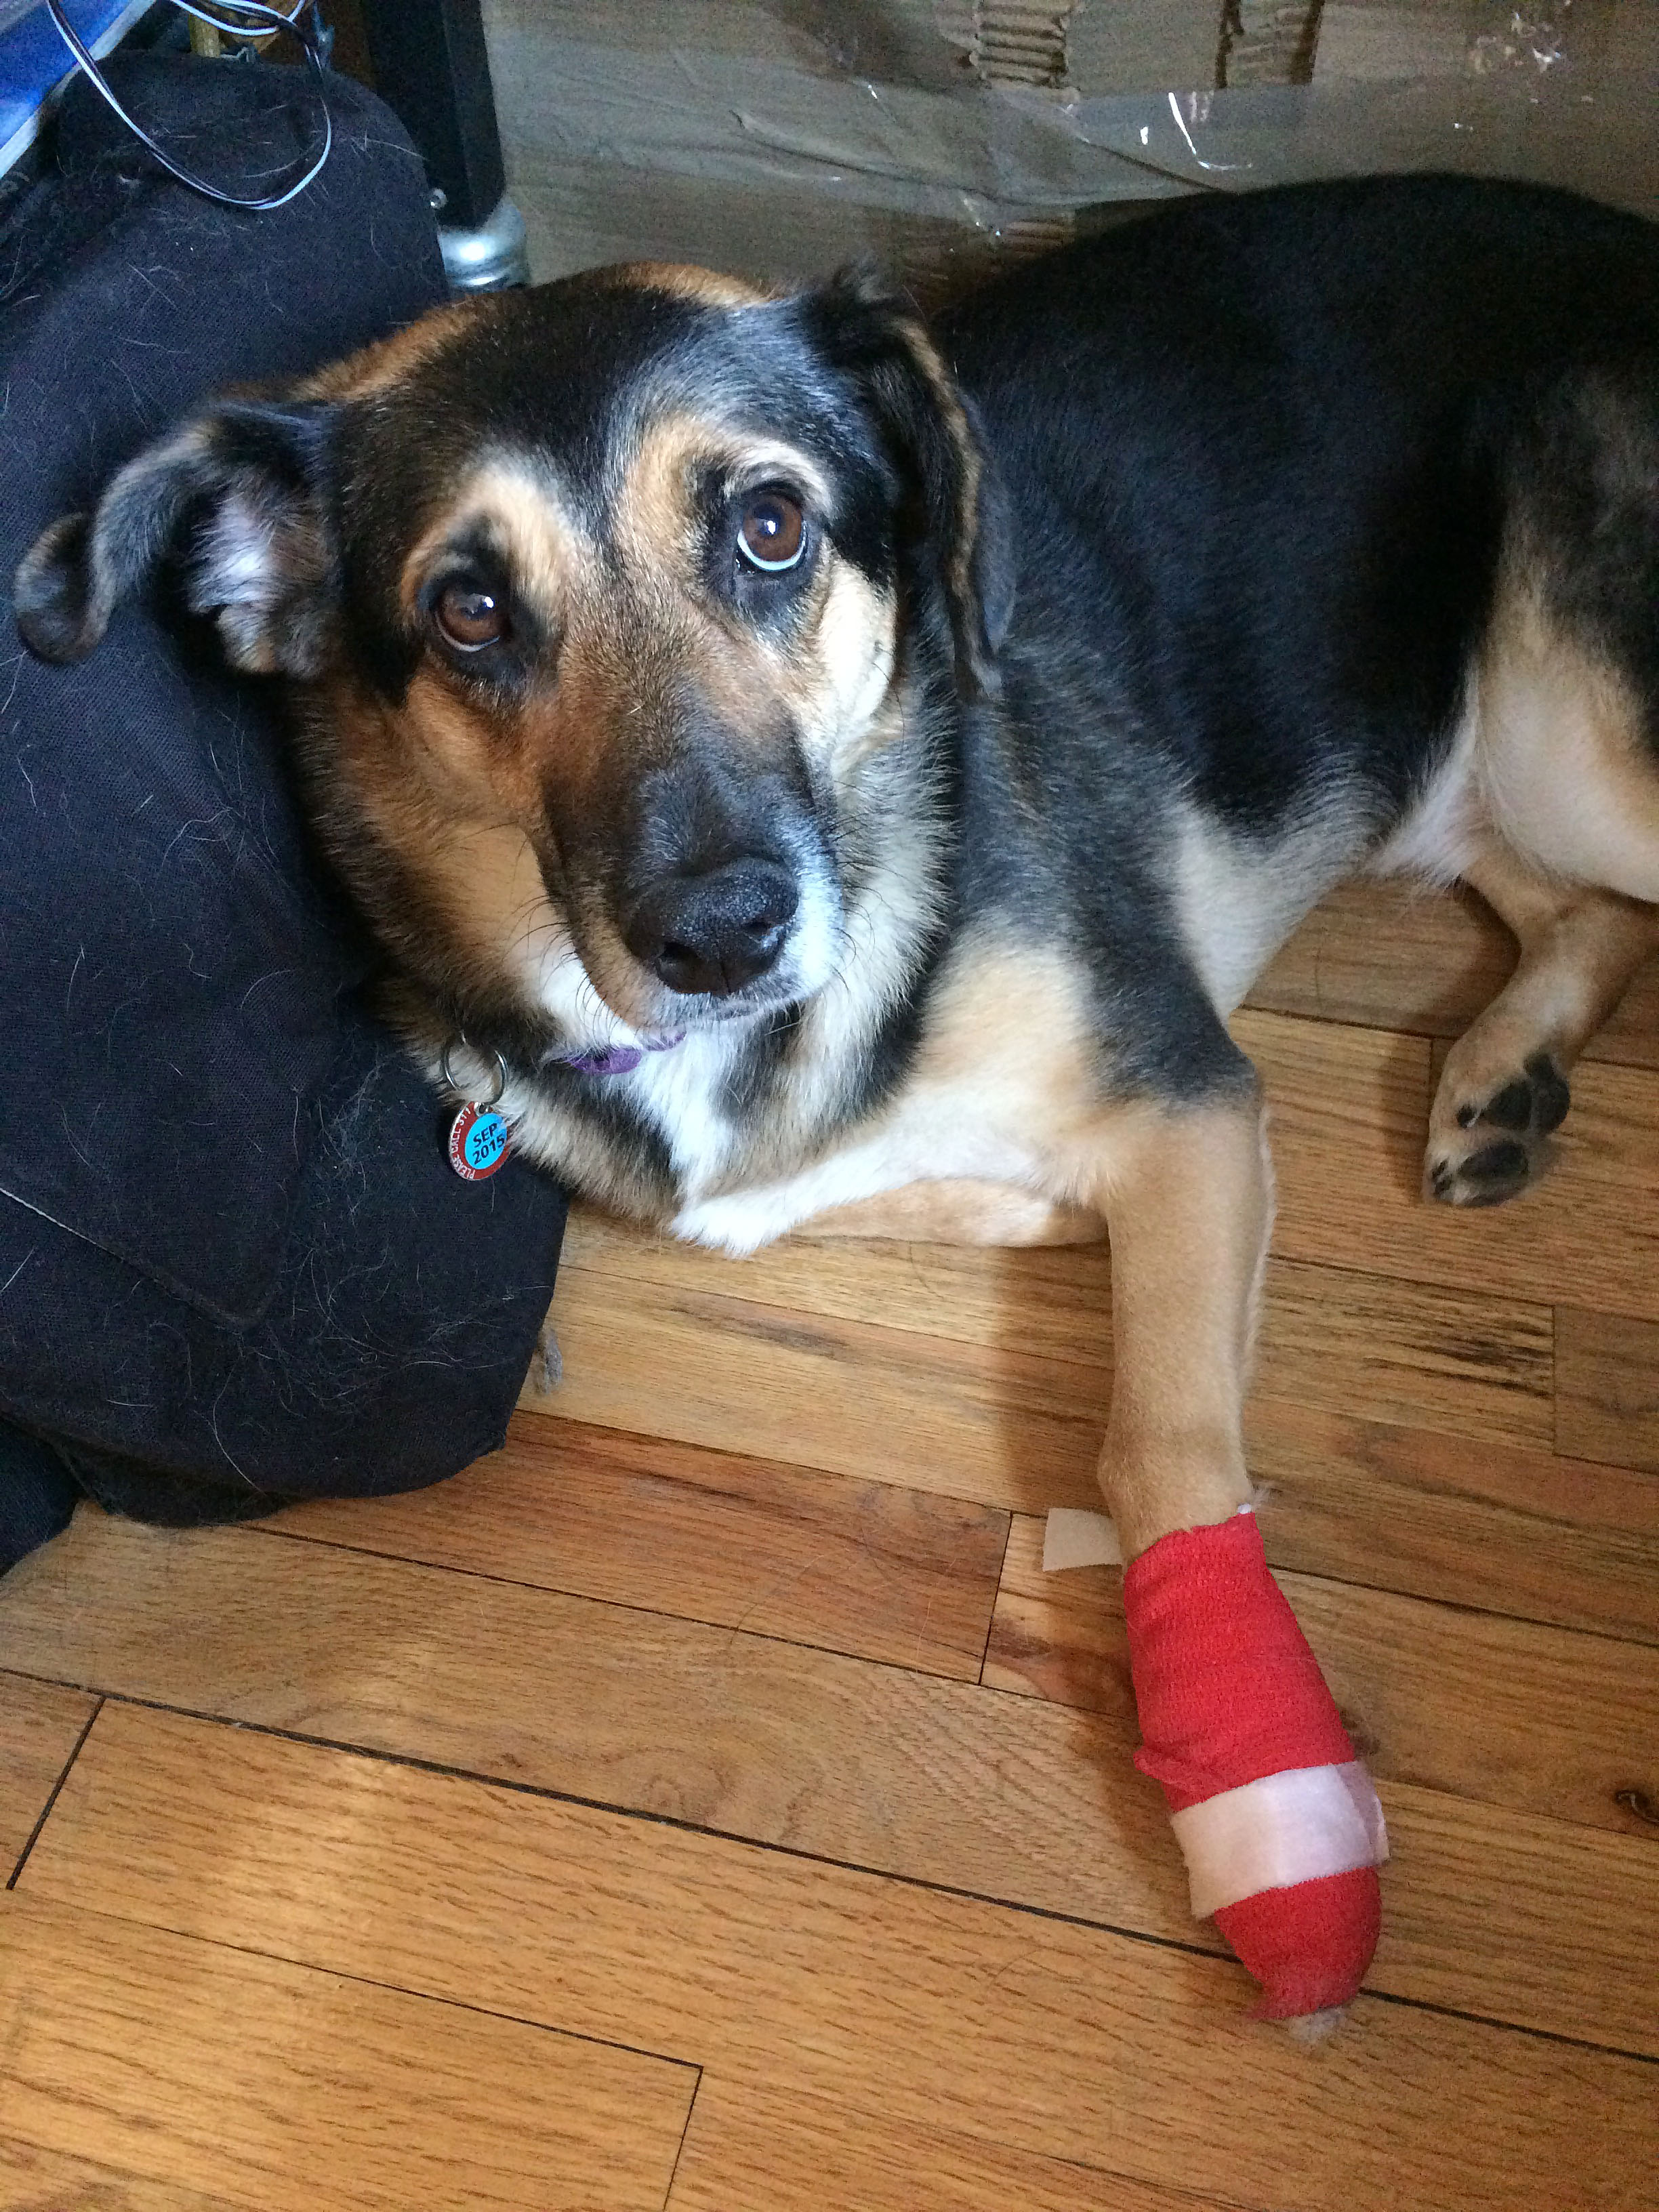 Leila with her injured paw